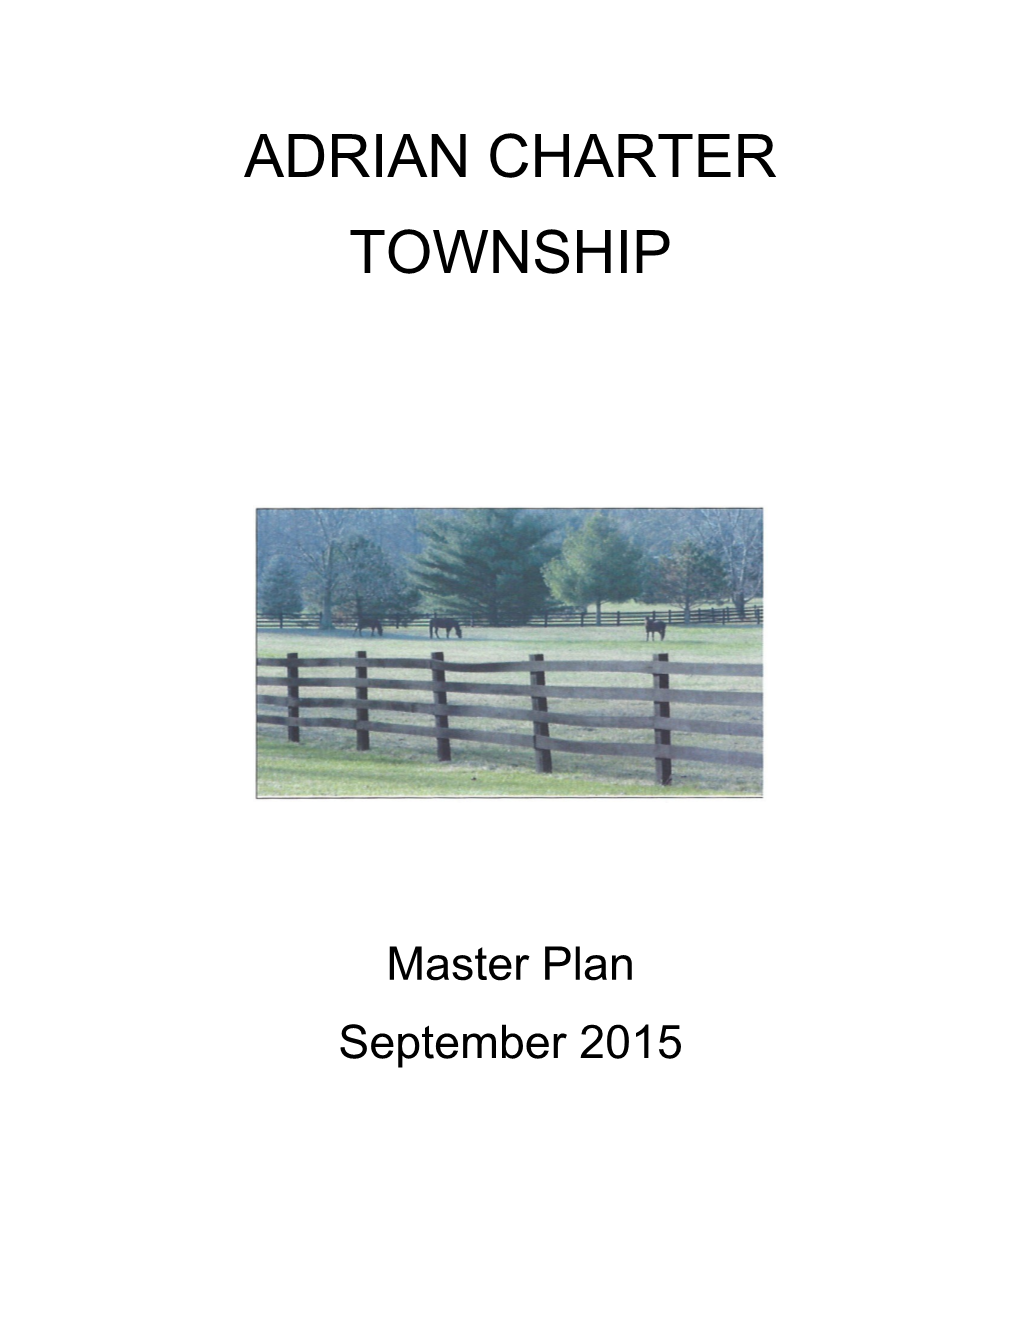 Adrian Charter Township Planning Commission